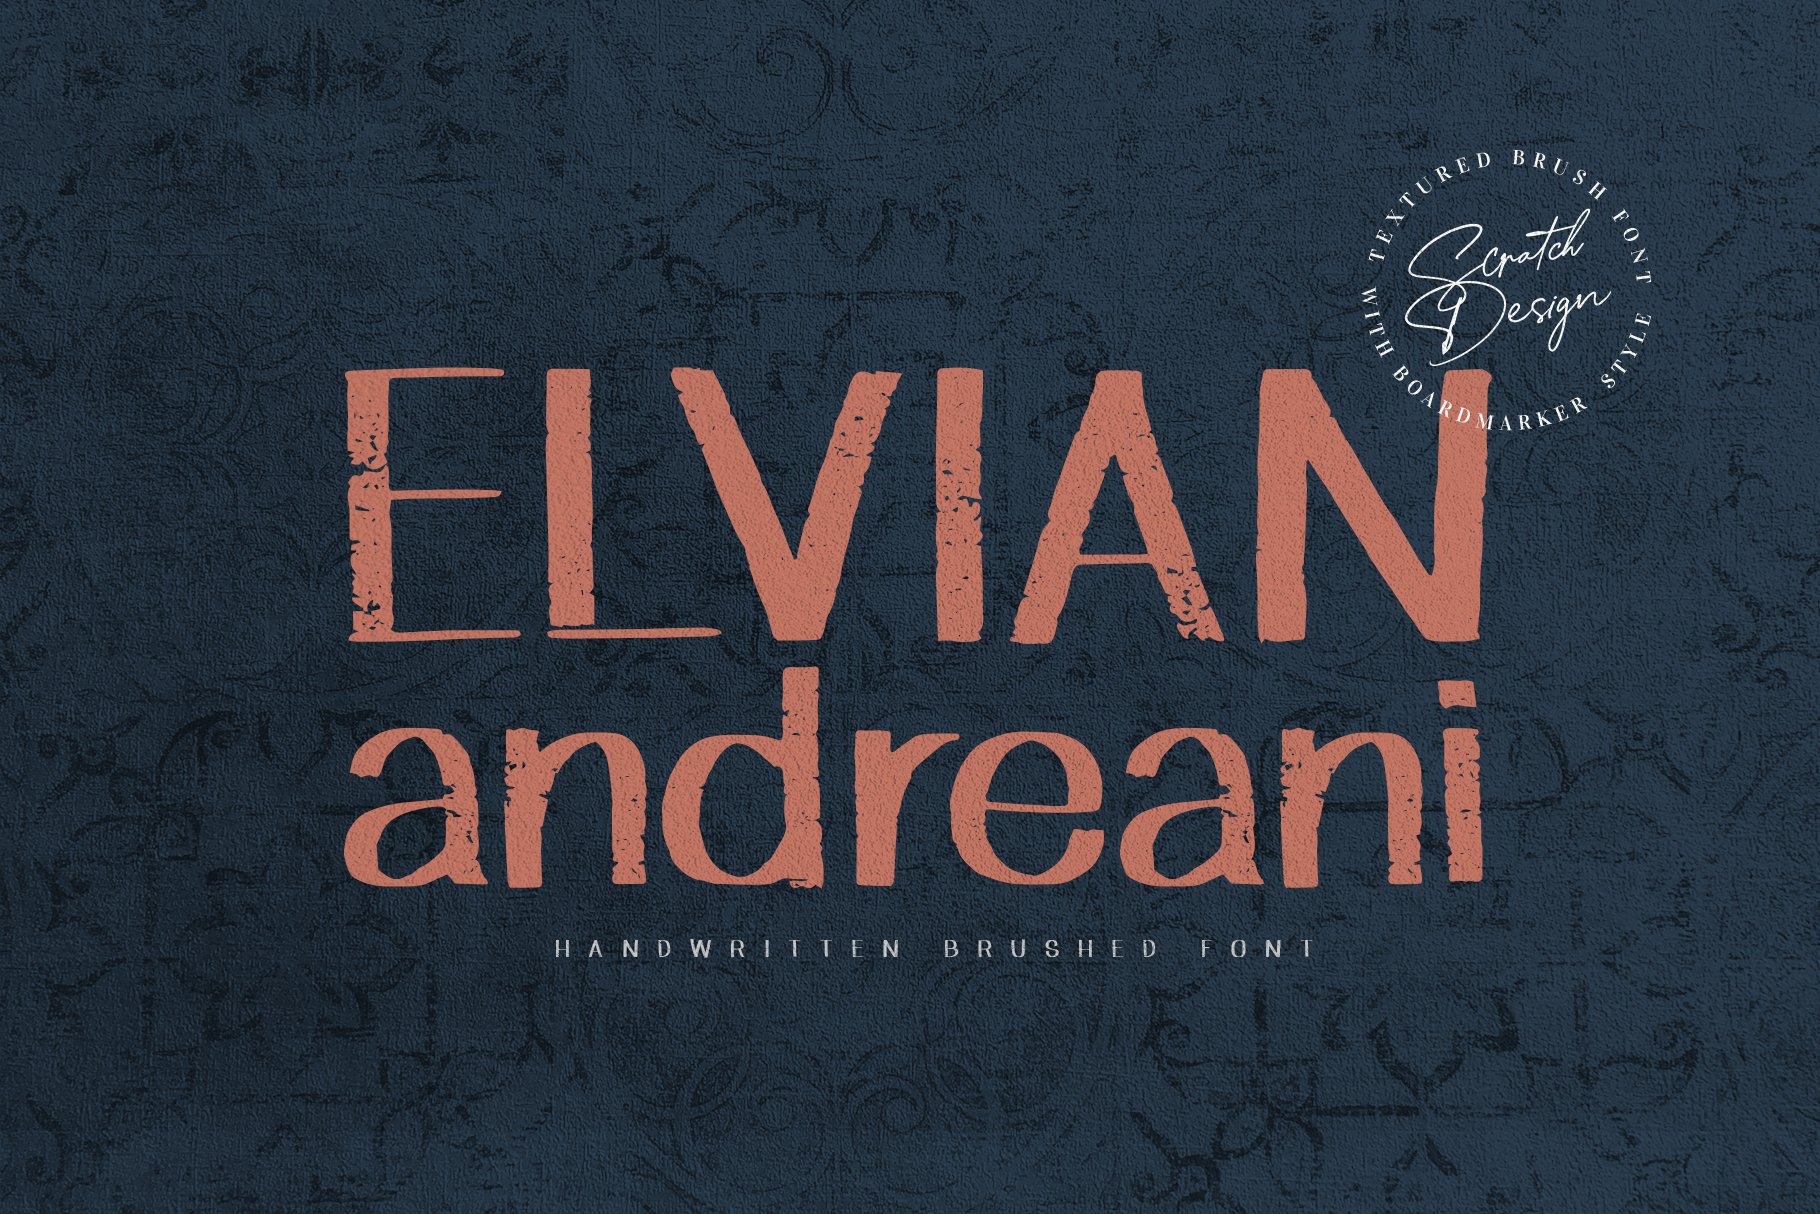 Elvian Andreani cover image.